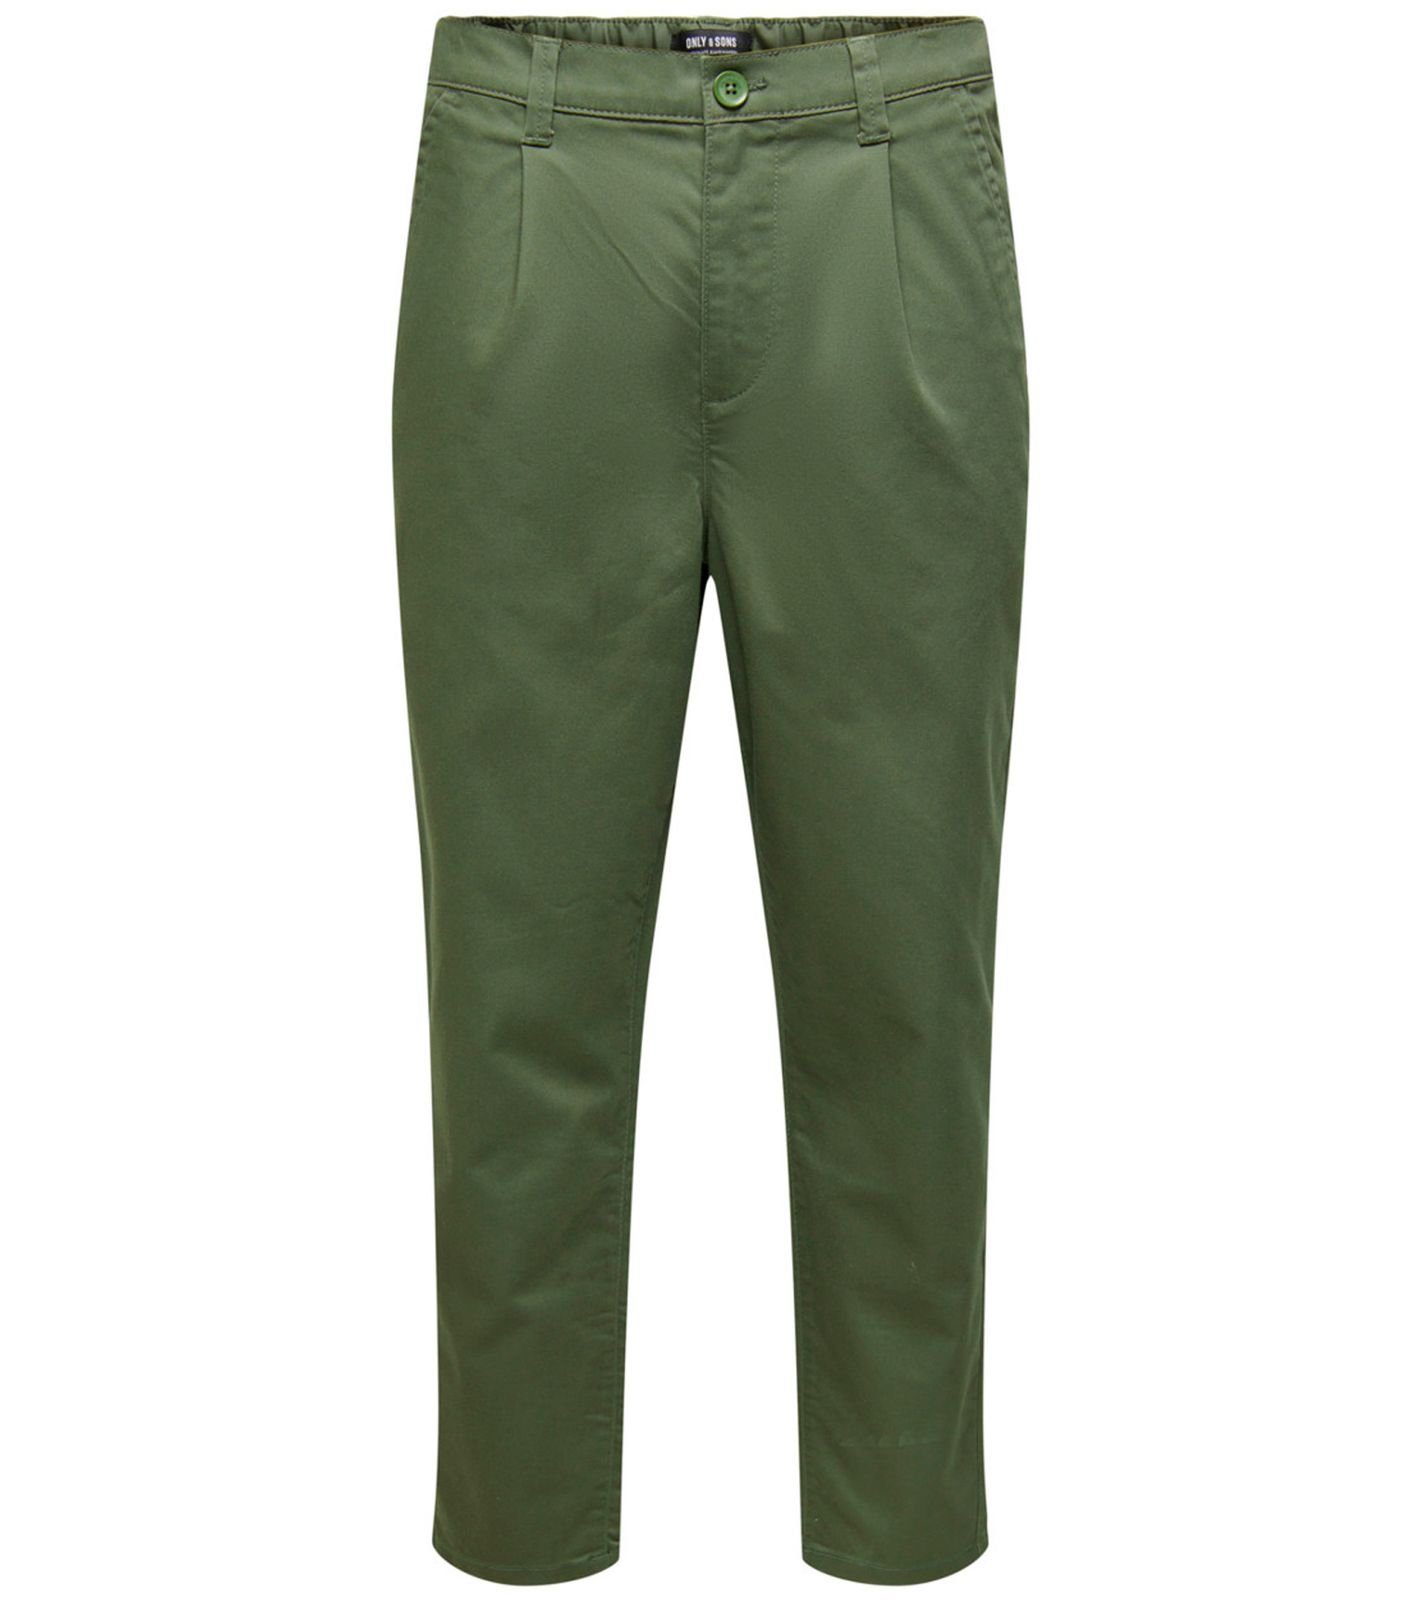 ONLY & SONS Chinohose ONLY SONS Herren Chino-Hose Oliv Freizeit-Hose 22021486 Tapered Stoff-Hose Dew & Grün